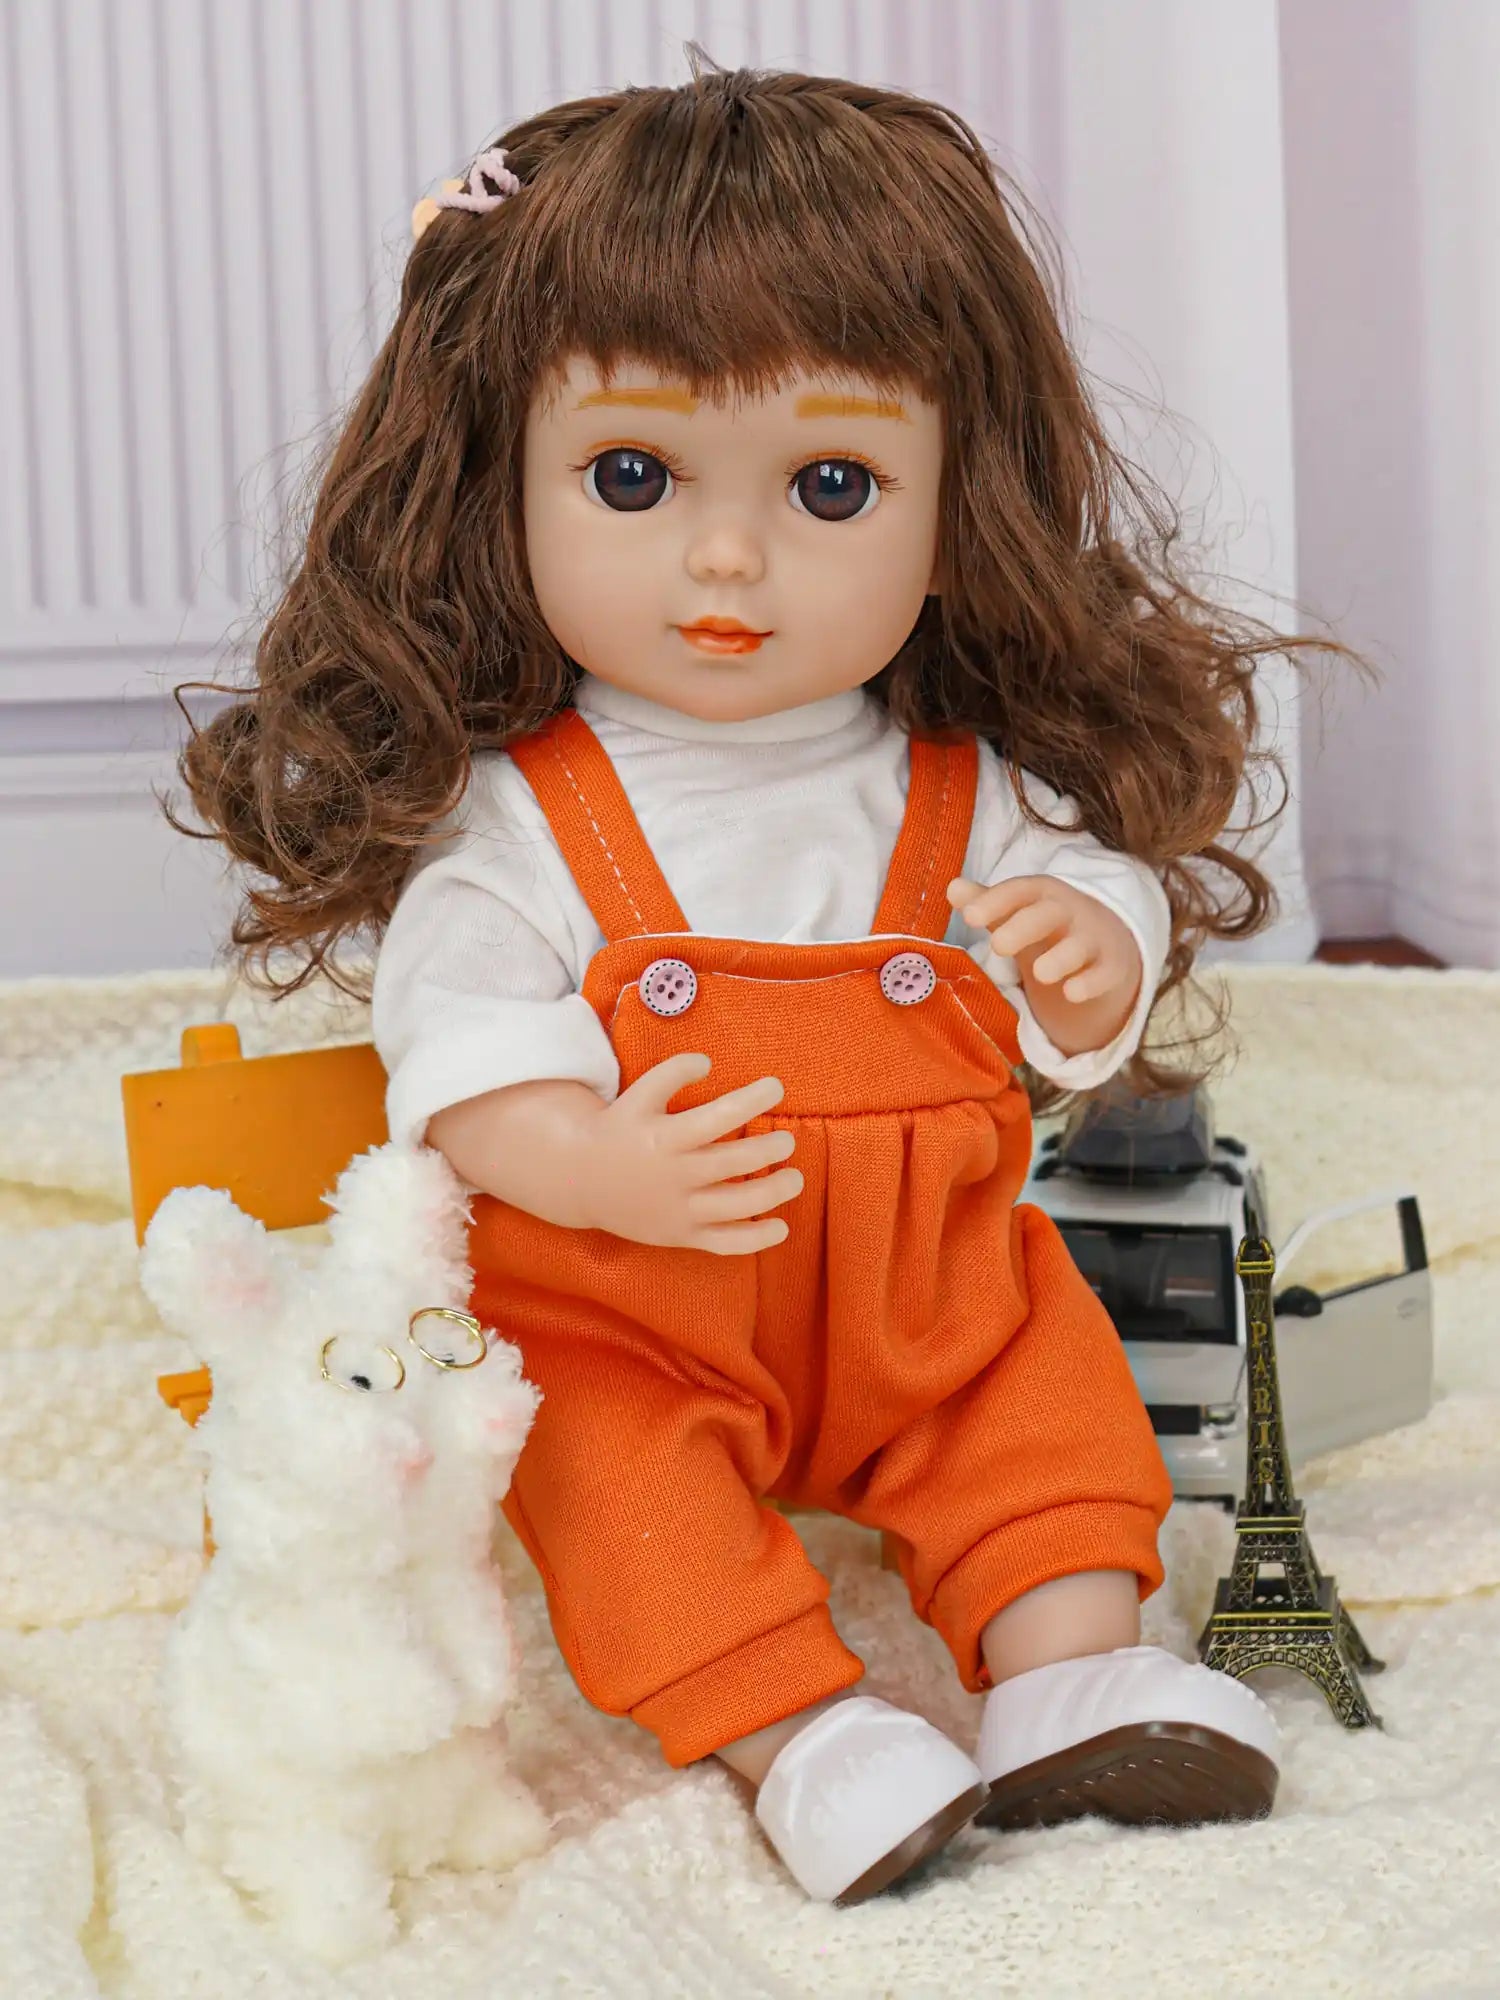 Curly-haired doll sitting, in a white top and orange pants, with a toy dog and miniature tower.